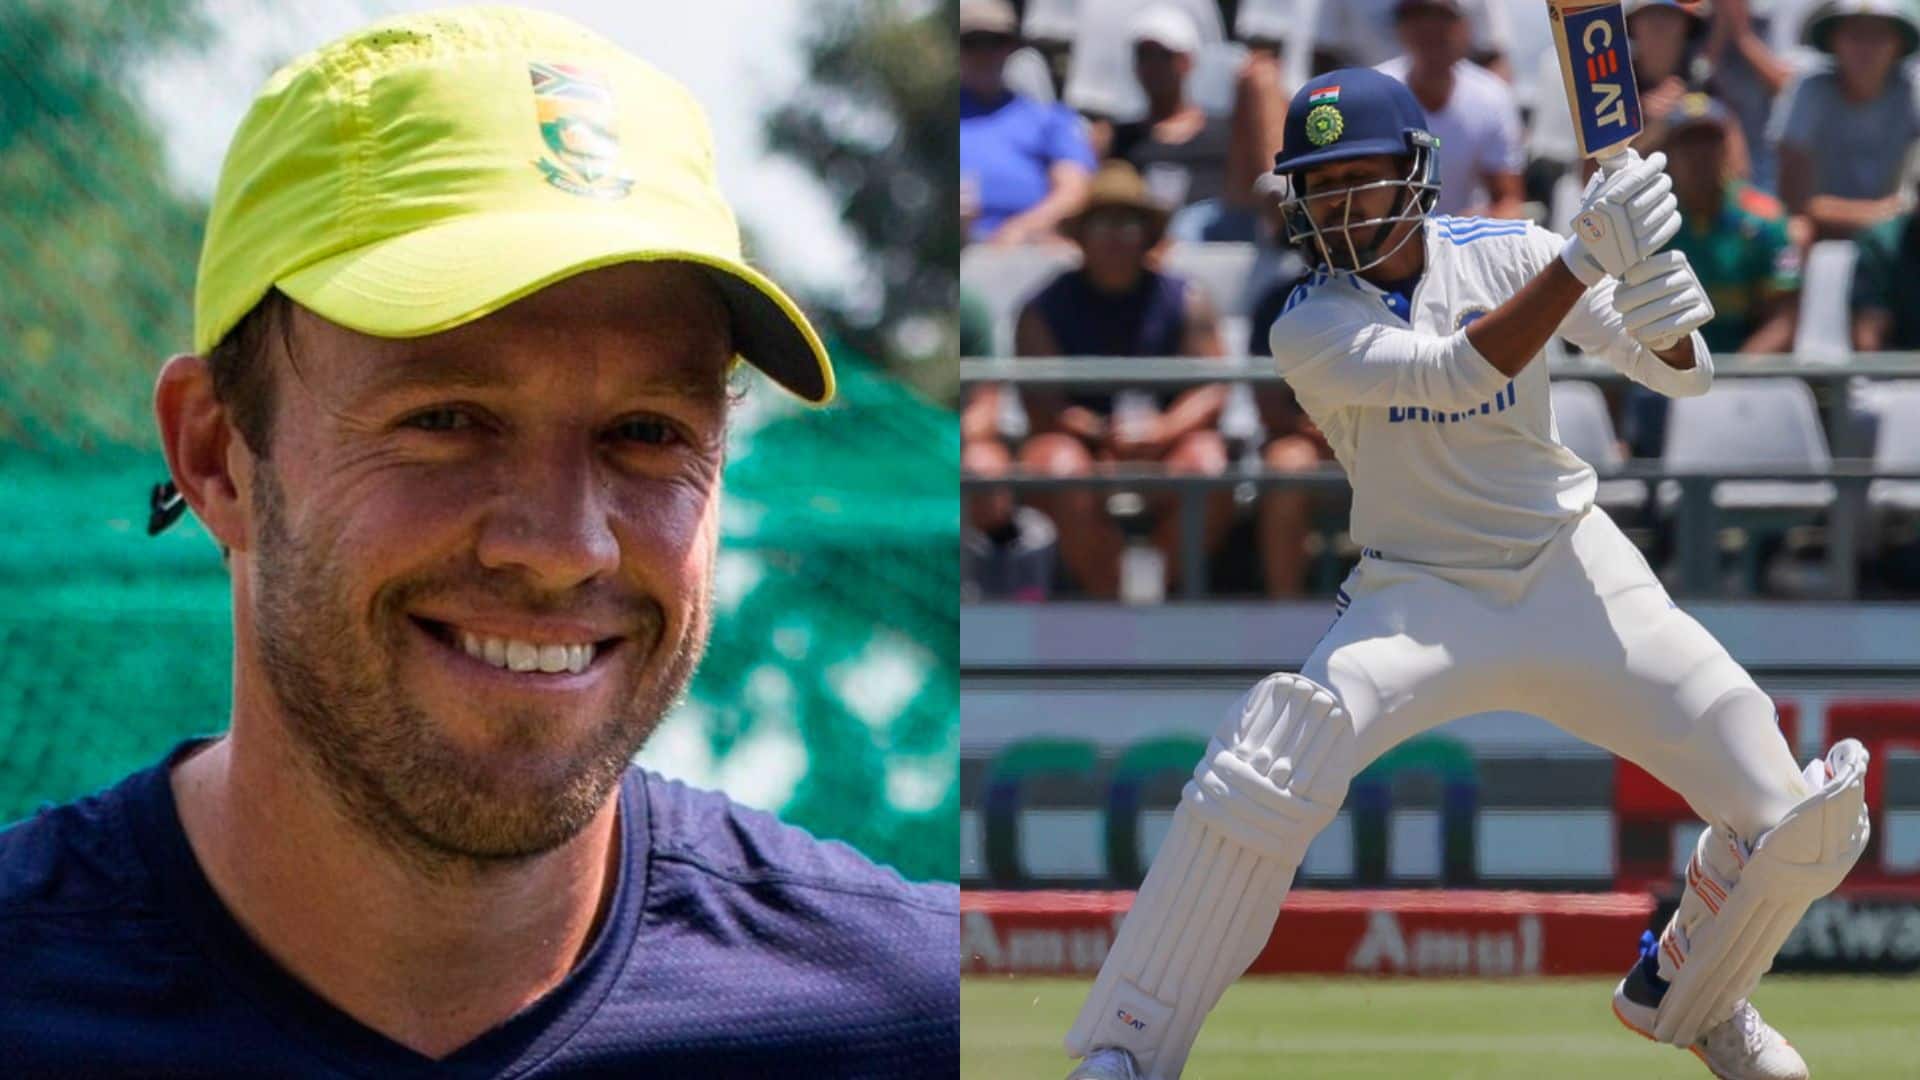 'That's Not How...,' - De Villiers Goes Vocal About Iyer's 'Aggressive Test Batting' Remark